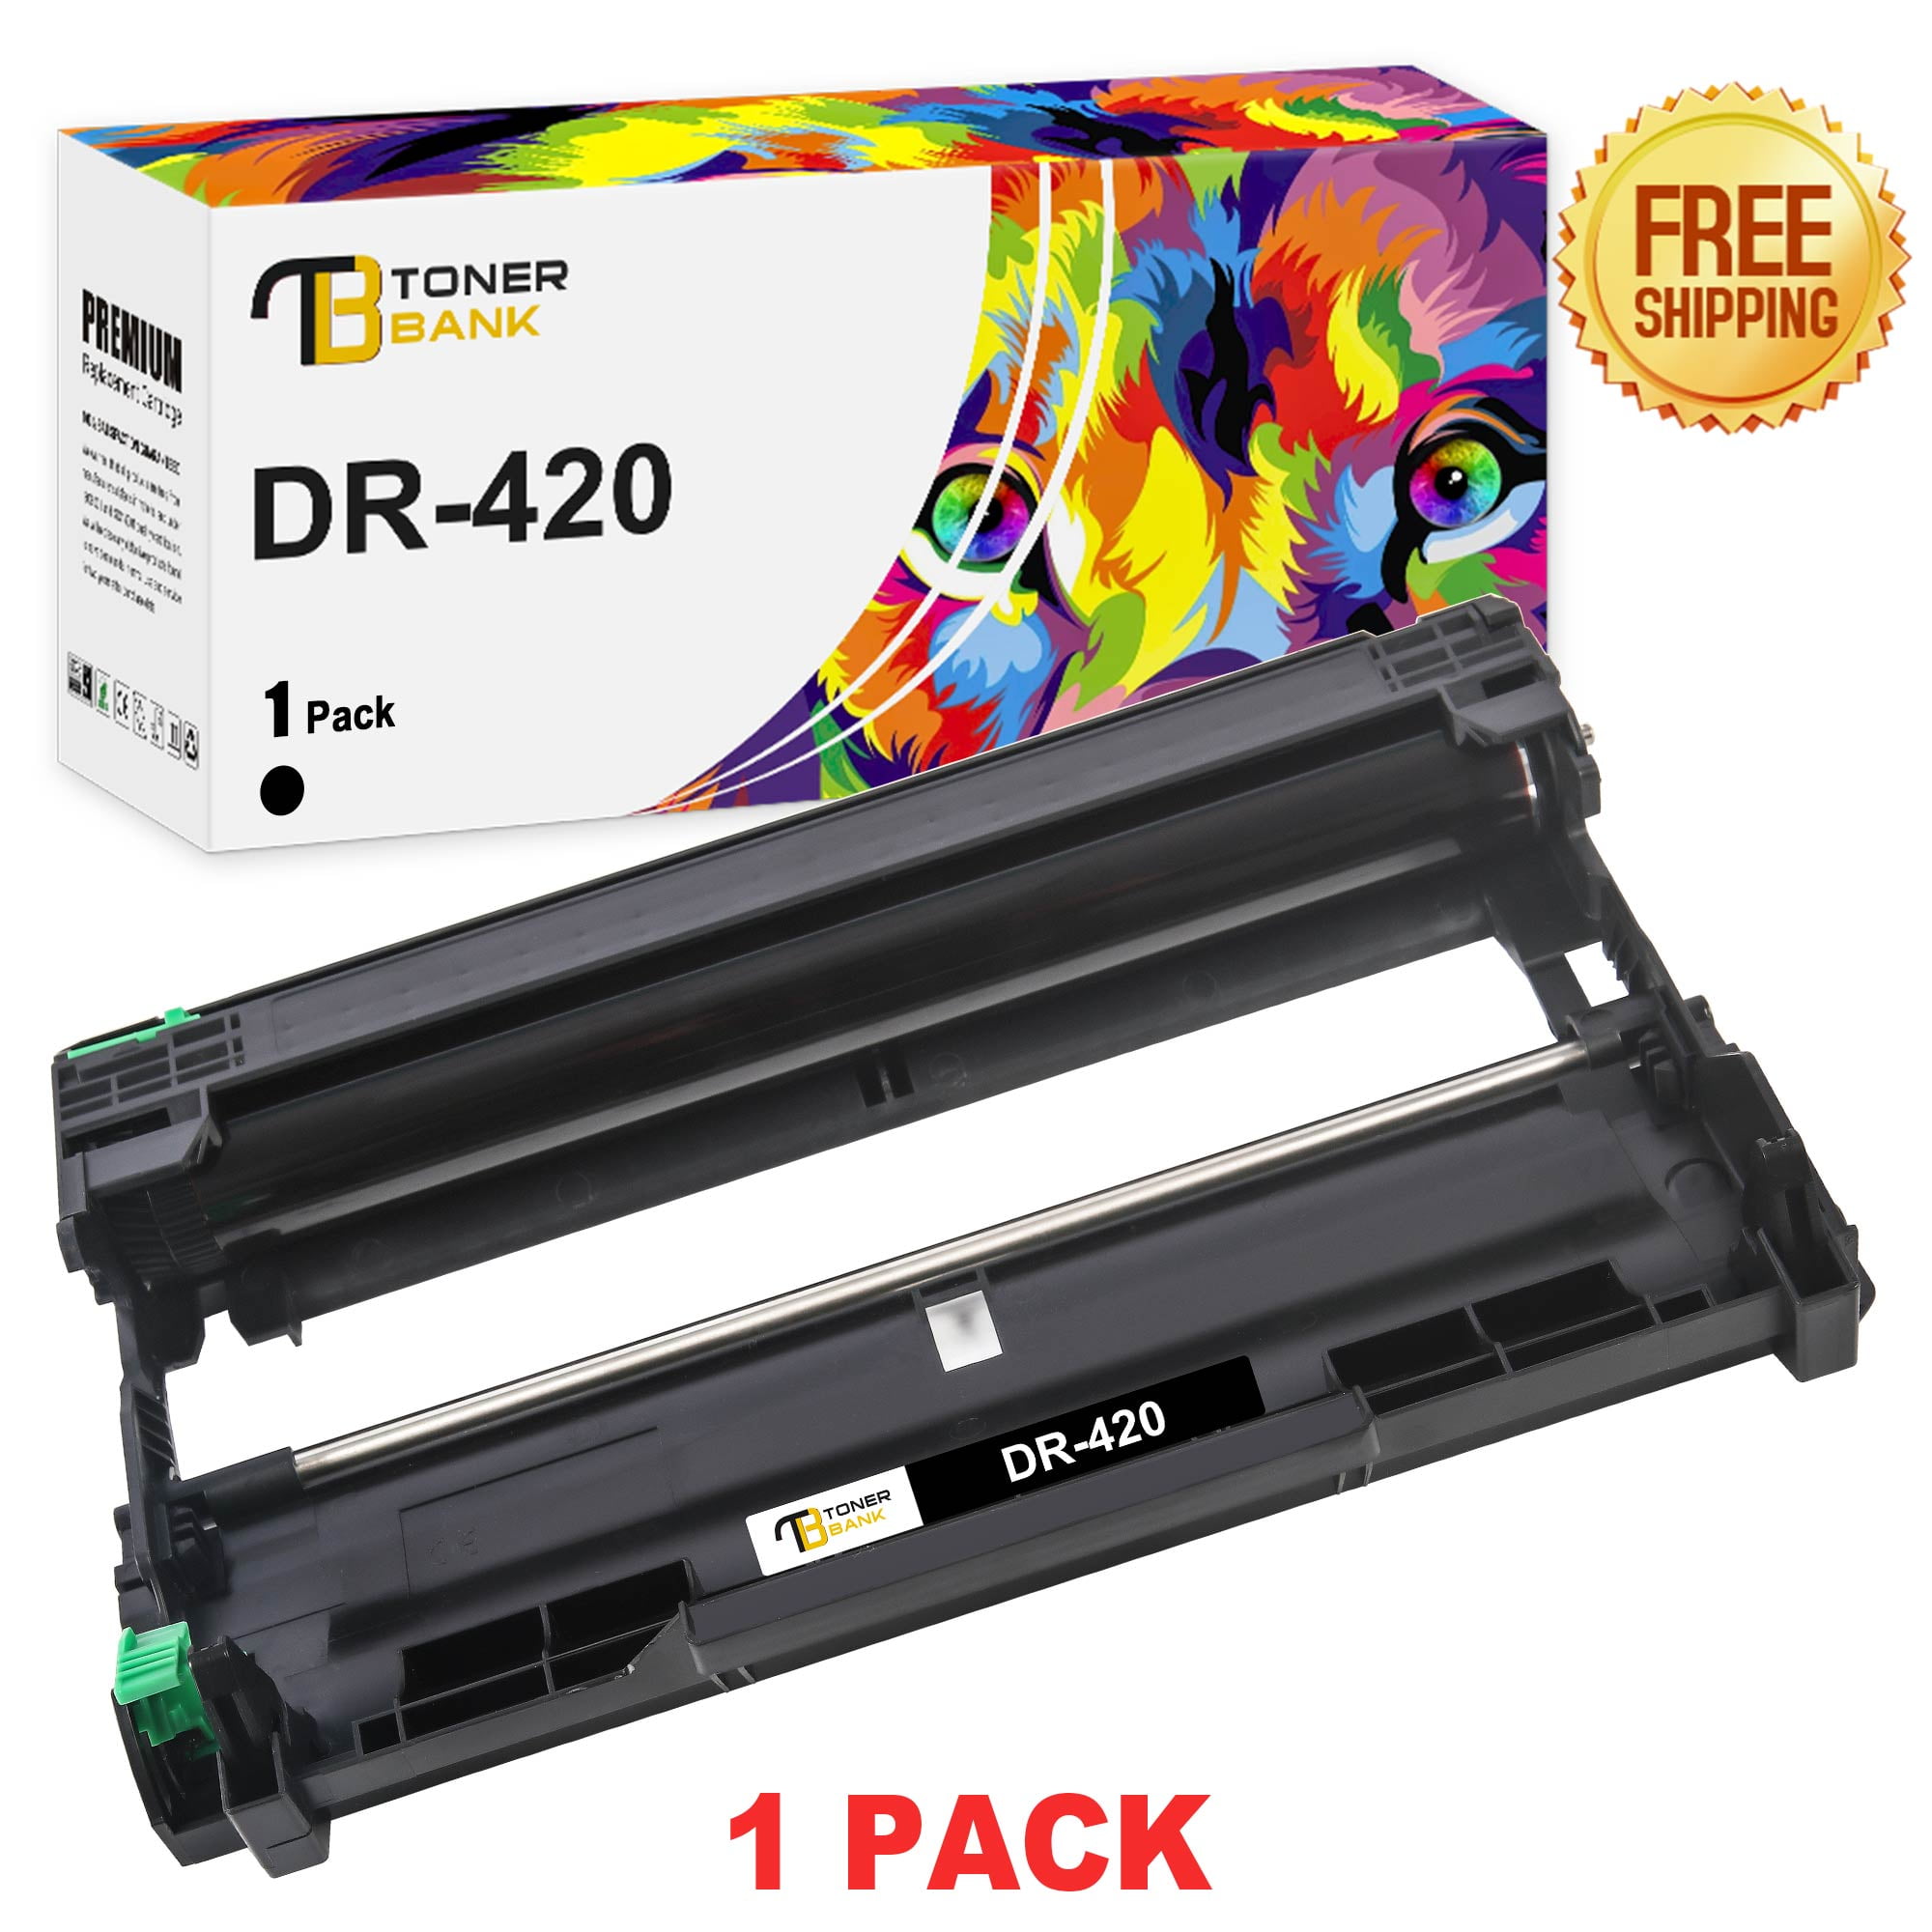 Buy Toner Bank Compatible Drum Unit for Brother DR420 DR-420 HL-2270DW  2280DW 2230 2240 MFC-7360N 7860DW DCP-7065DN Intellifax 2840 Printer （Black,  1 Pack Online in Chad. 1321661480